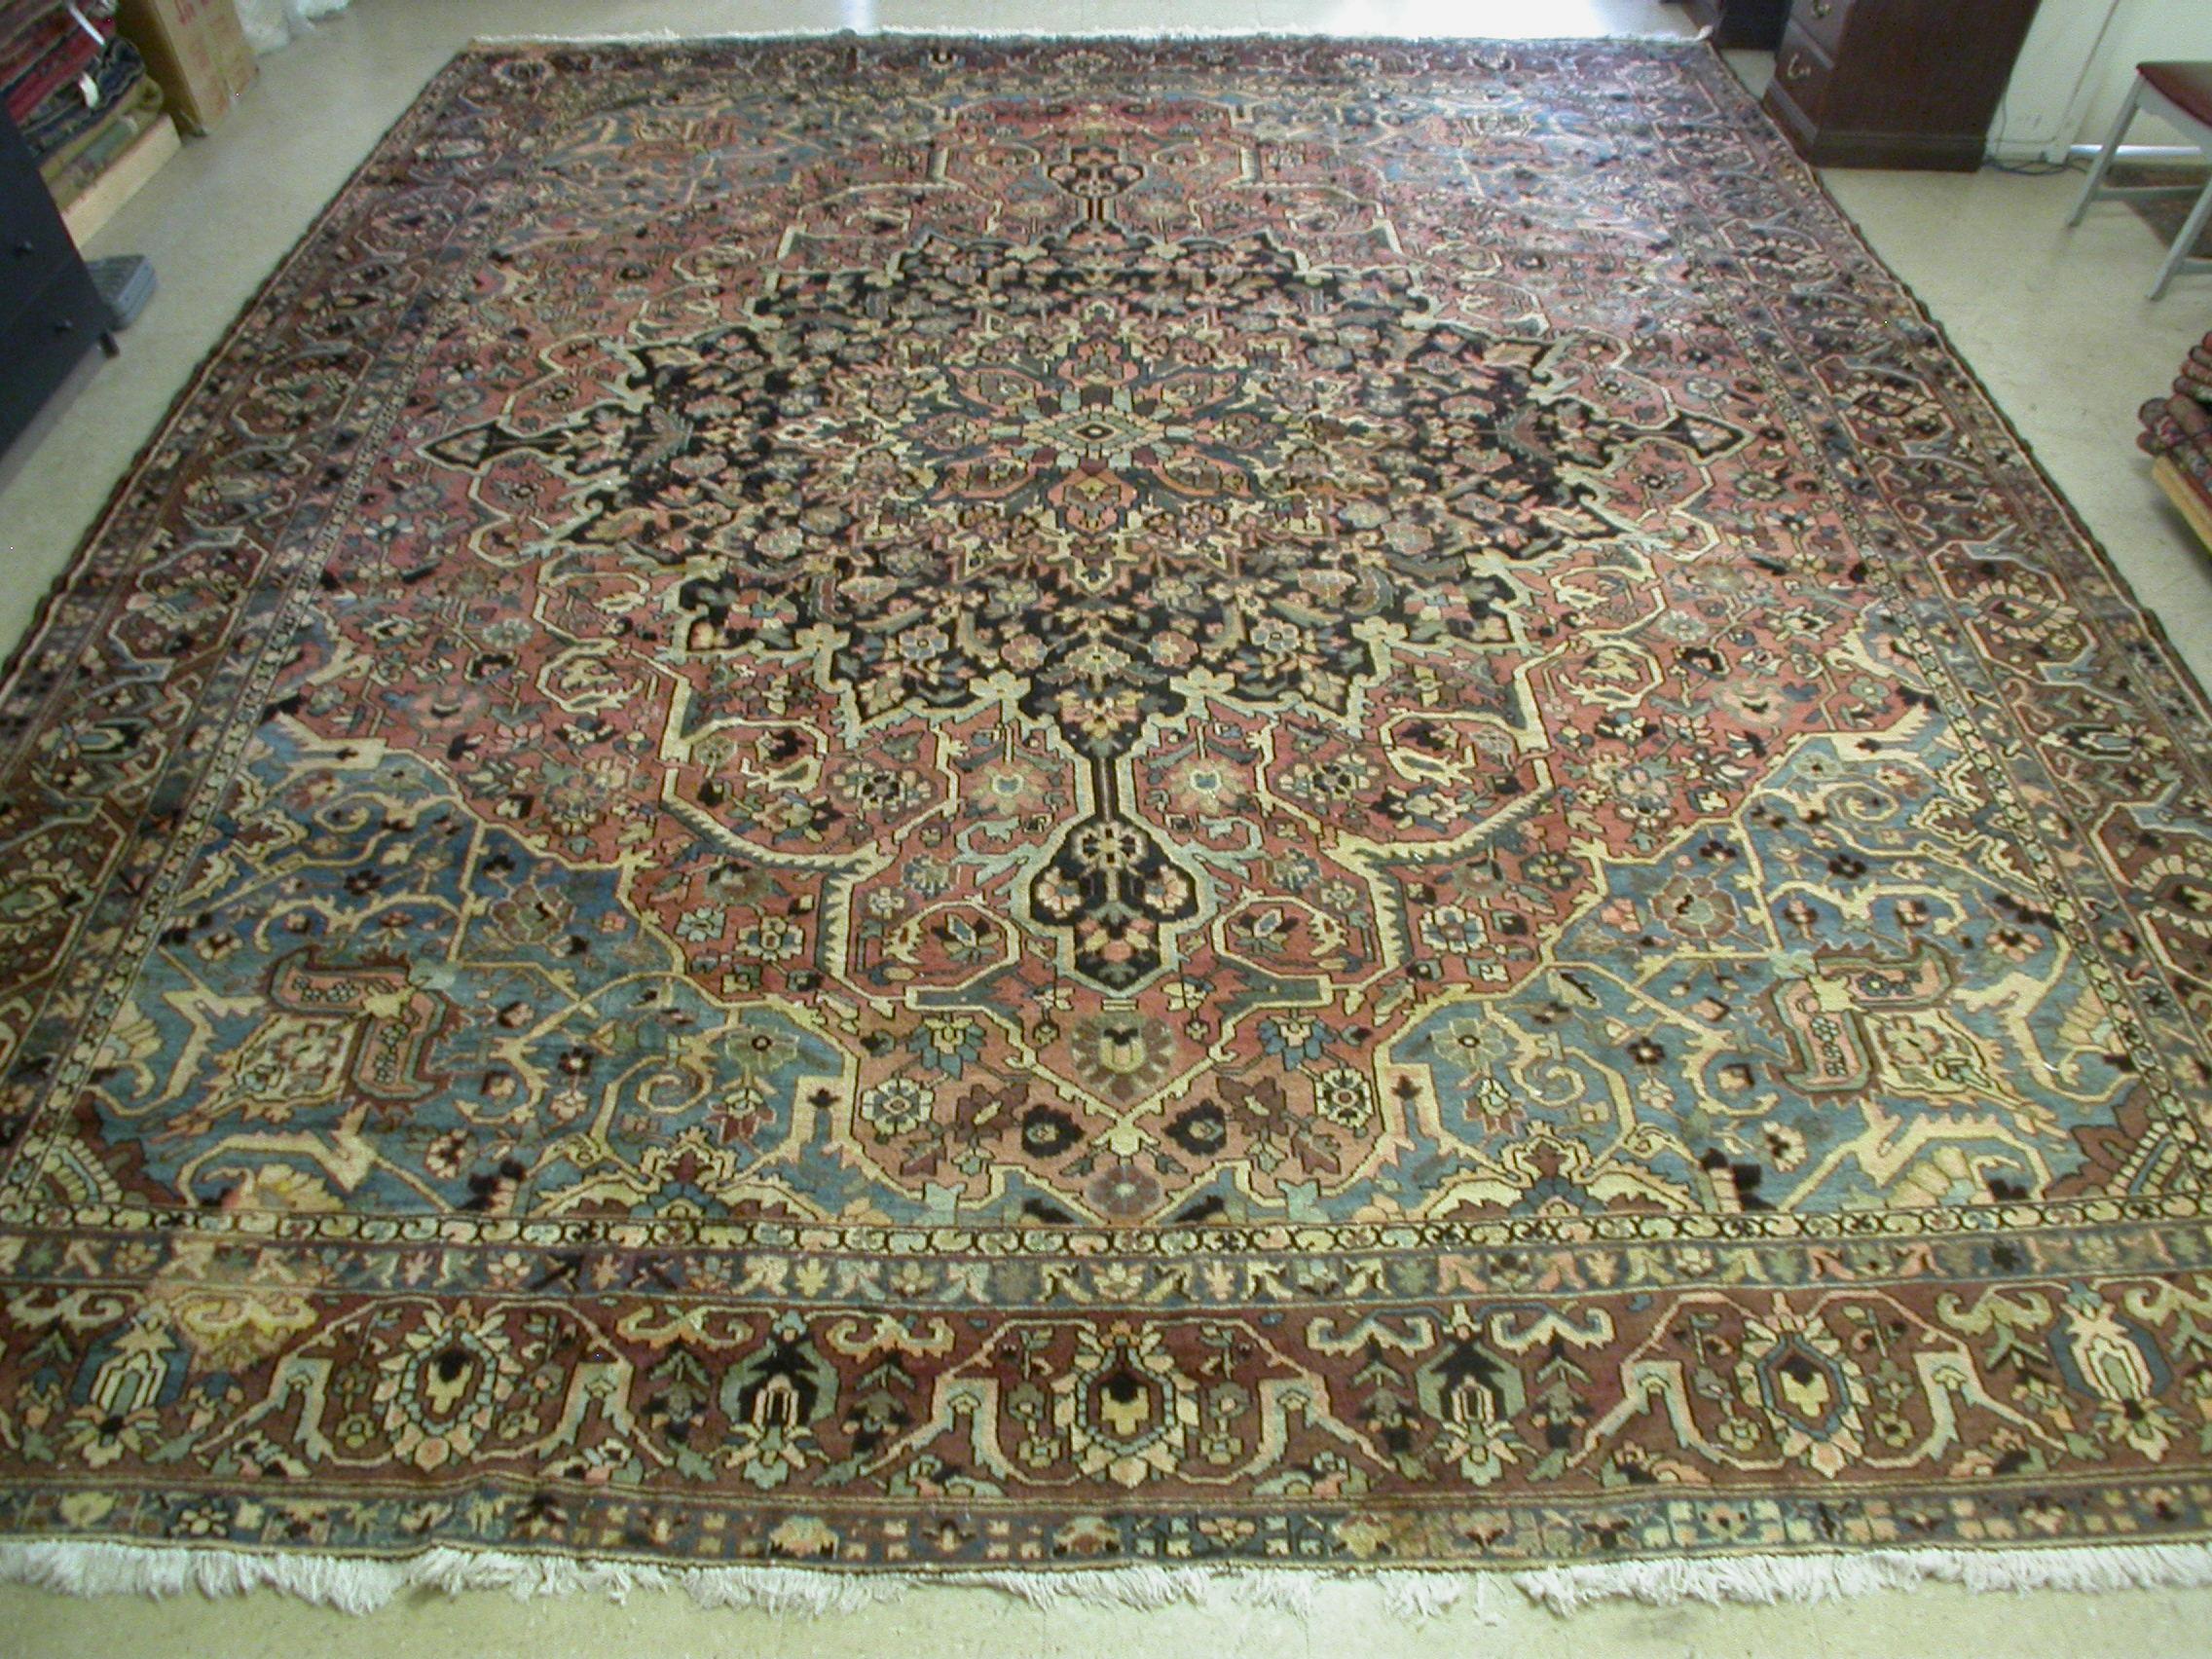 Hand-Knotted Antique Oversize Large Square Light Blue Rose Brown Bakhtiari Persian Rug, 1940s